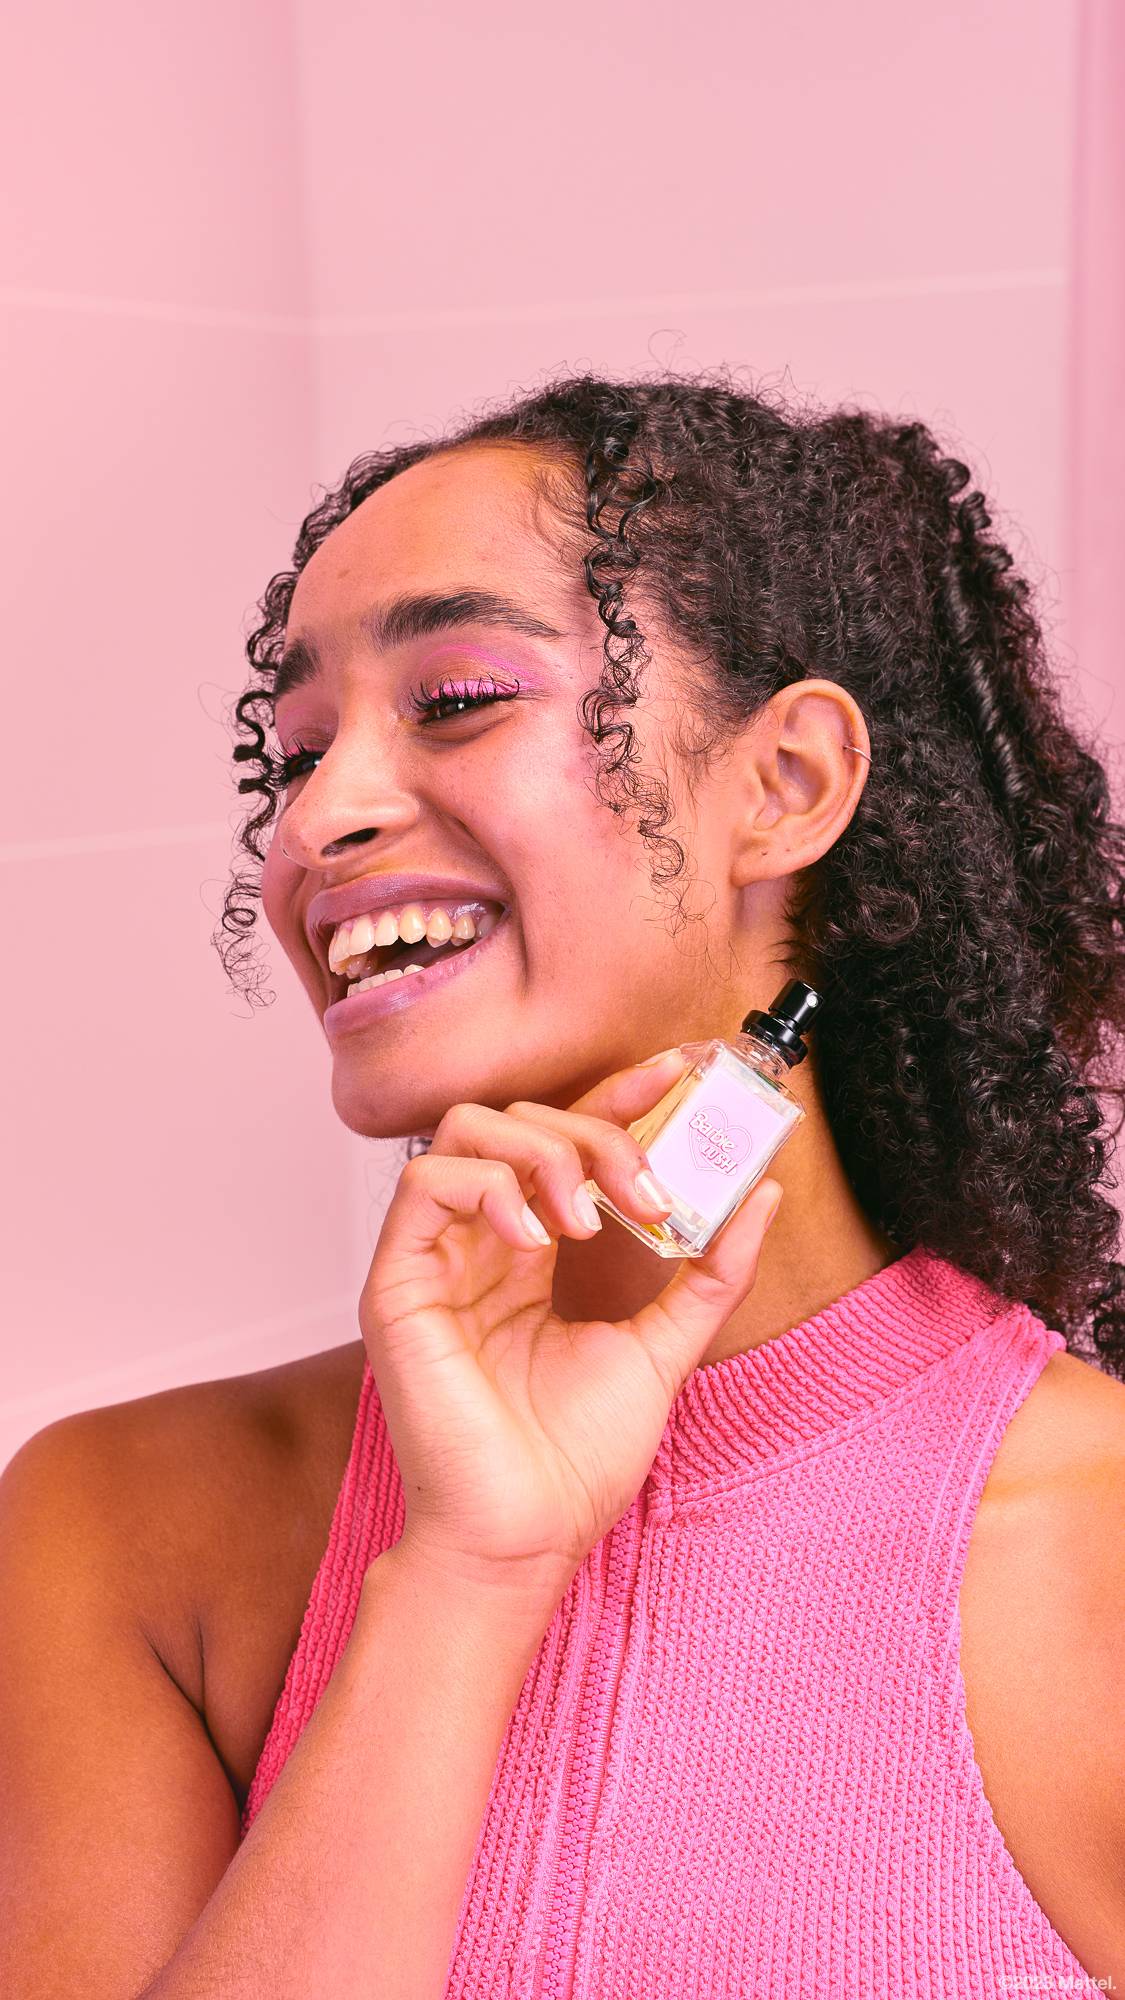 Model is holding the perfume bottle up by their face. They are smiling, wearing pink make up and clothing on a pink background.